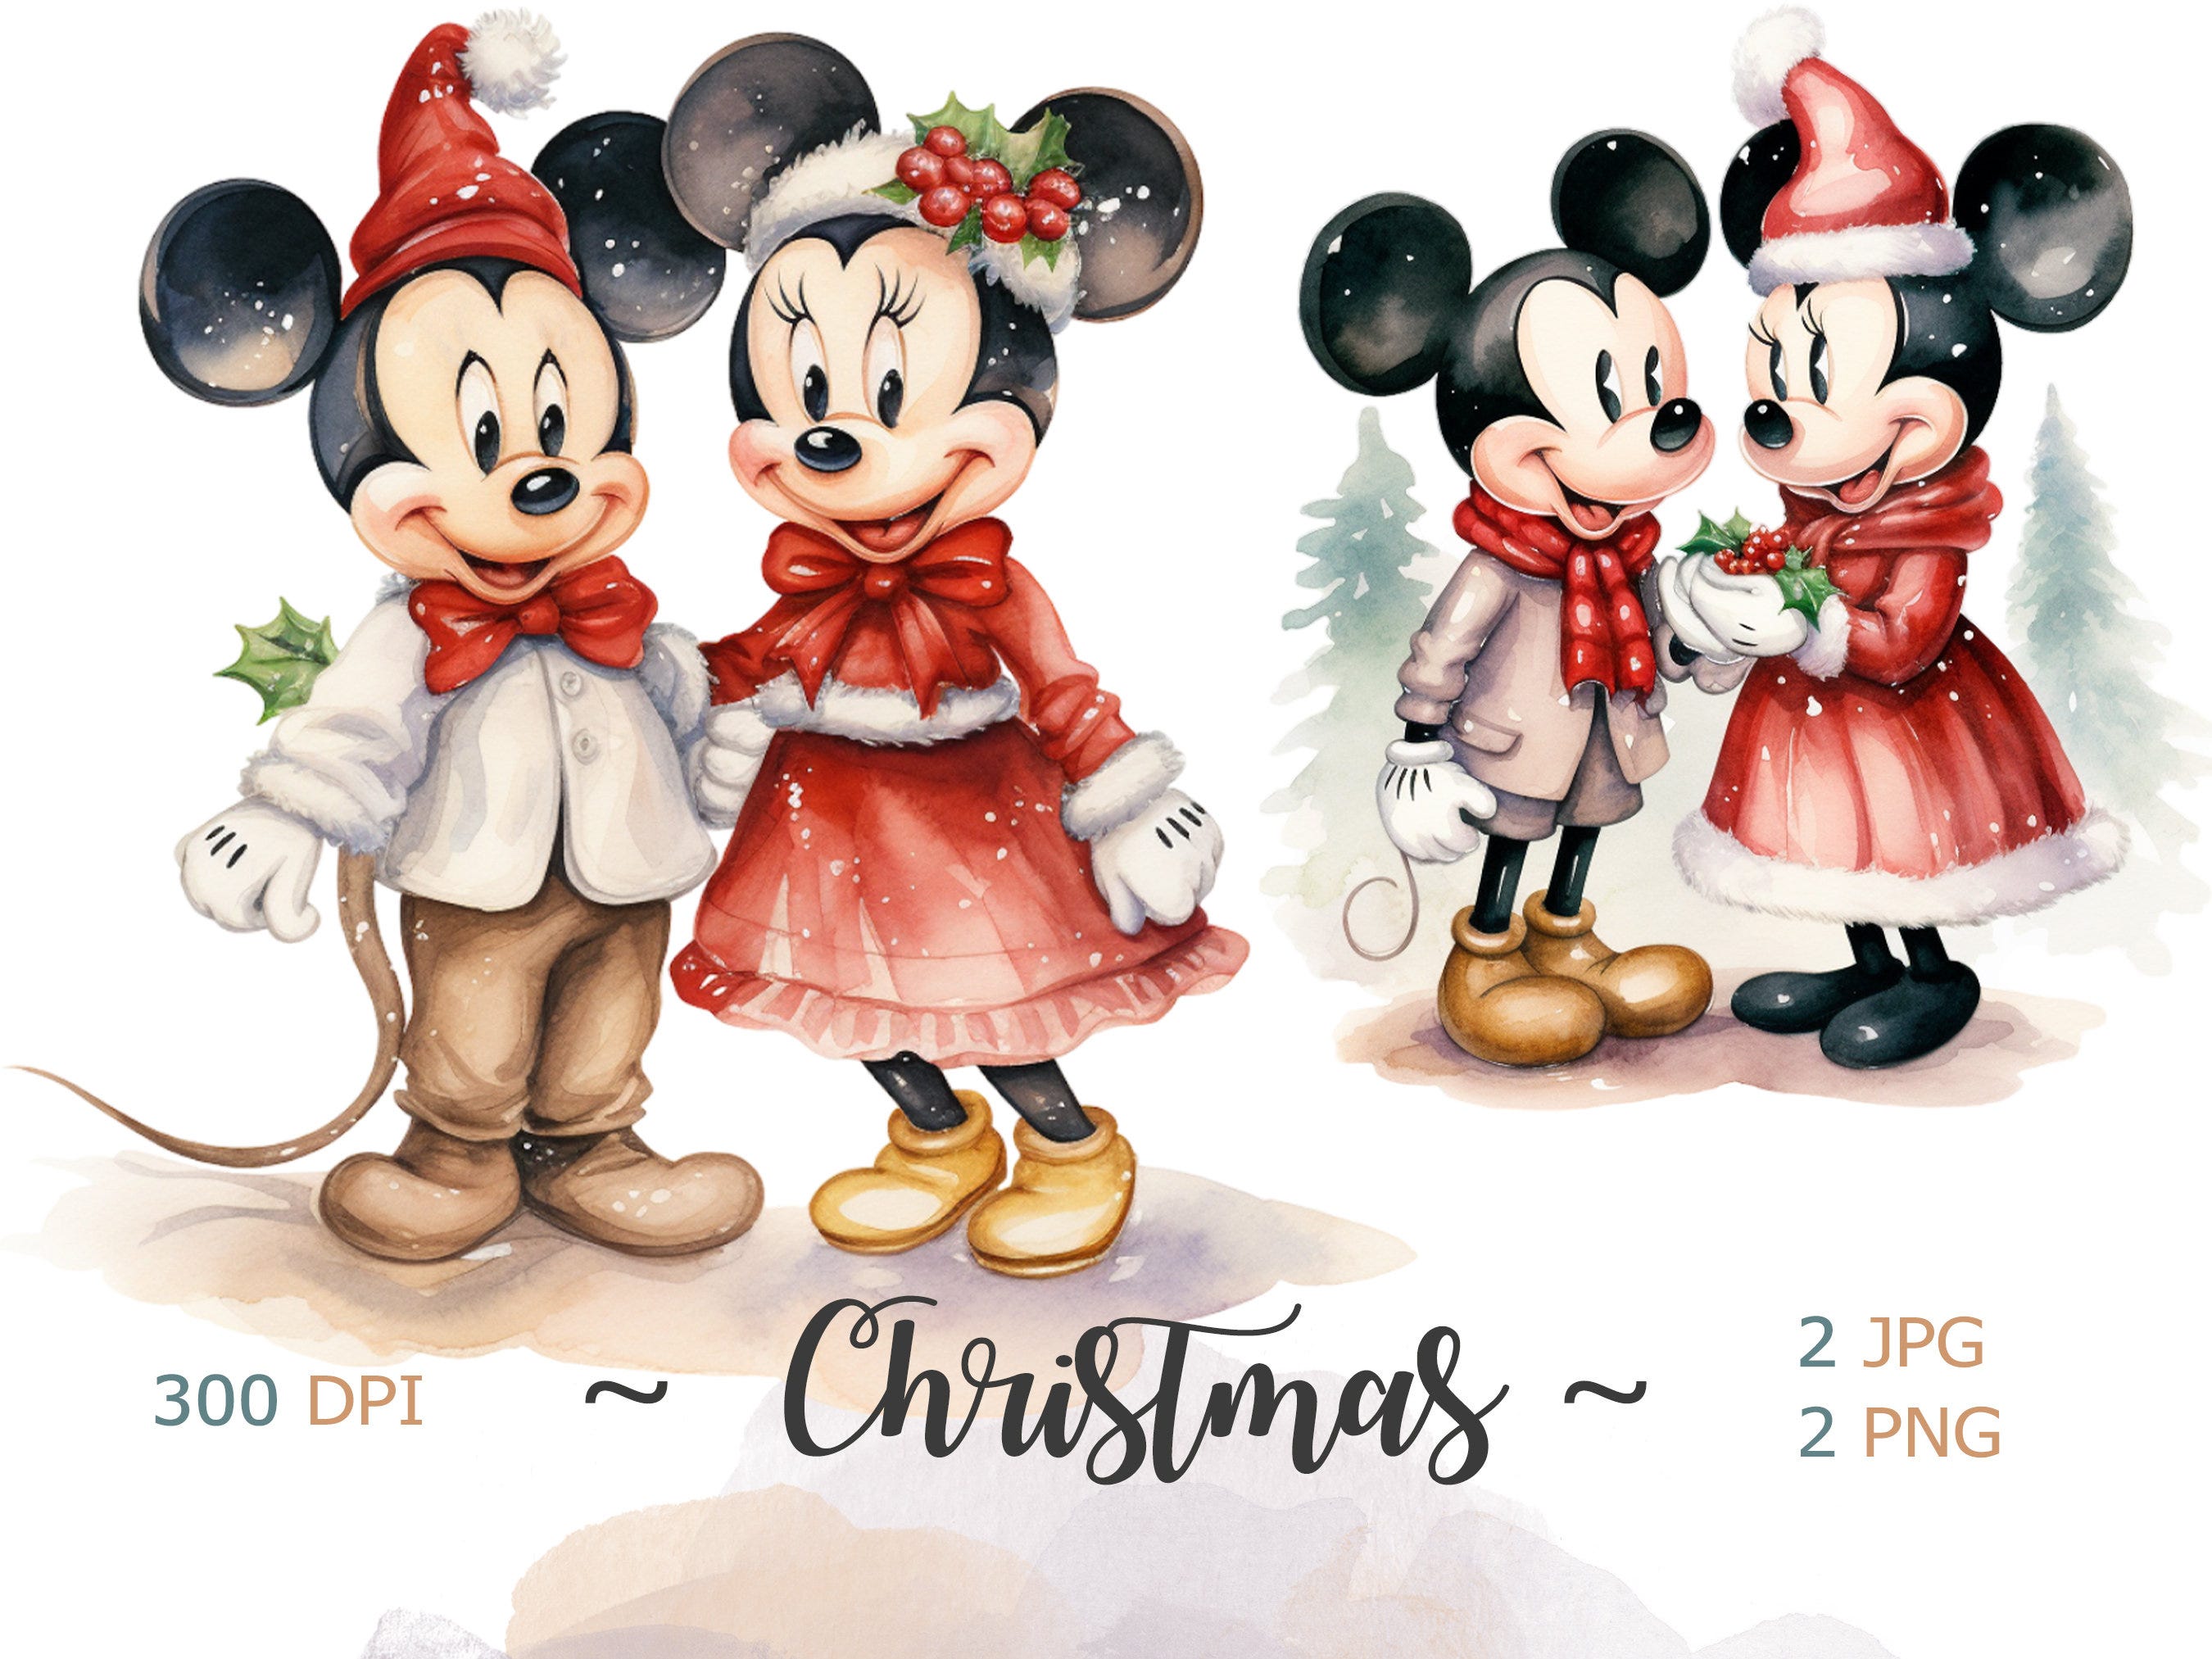 Christmas Mickey and Mini Mouse clipart, Watercolor clipart, Instant download